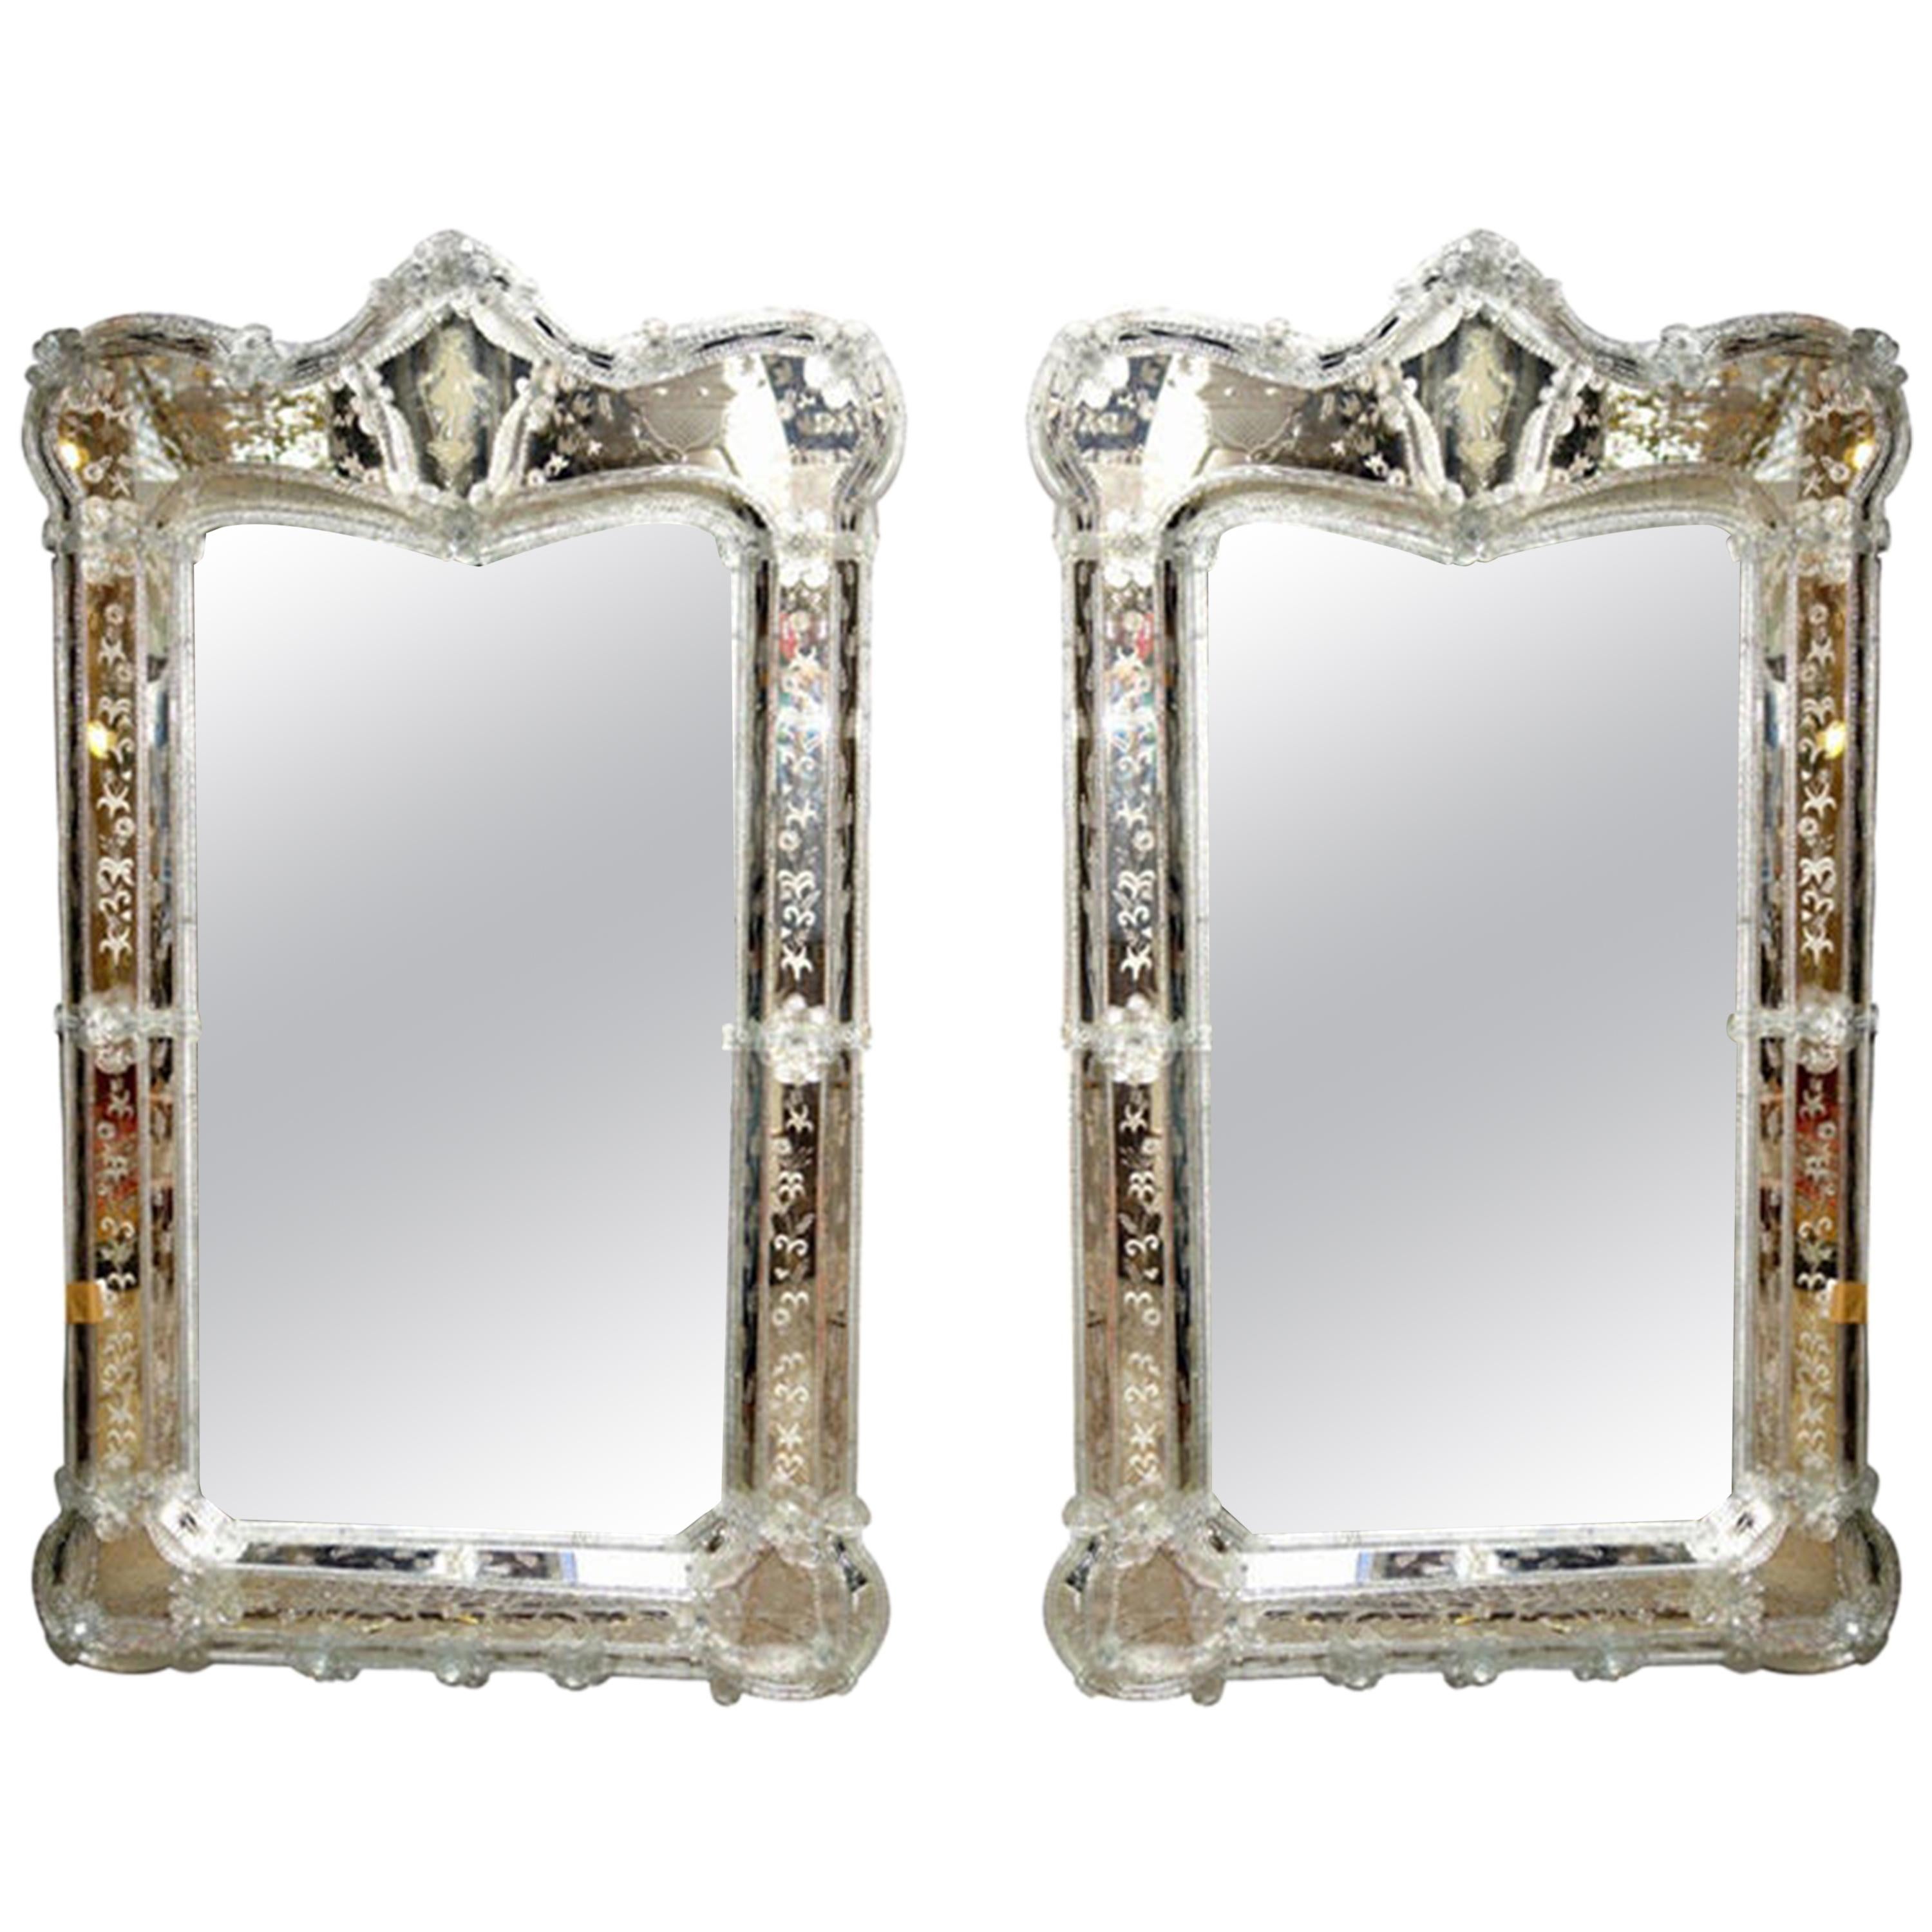 Pair of Antique Palatial Venetian Mirrors For Sale